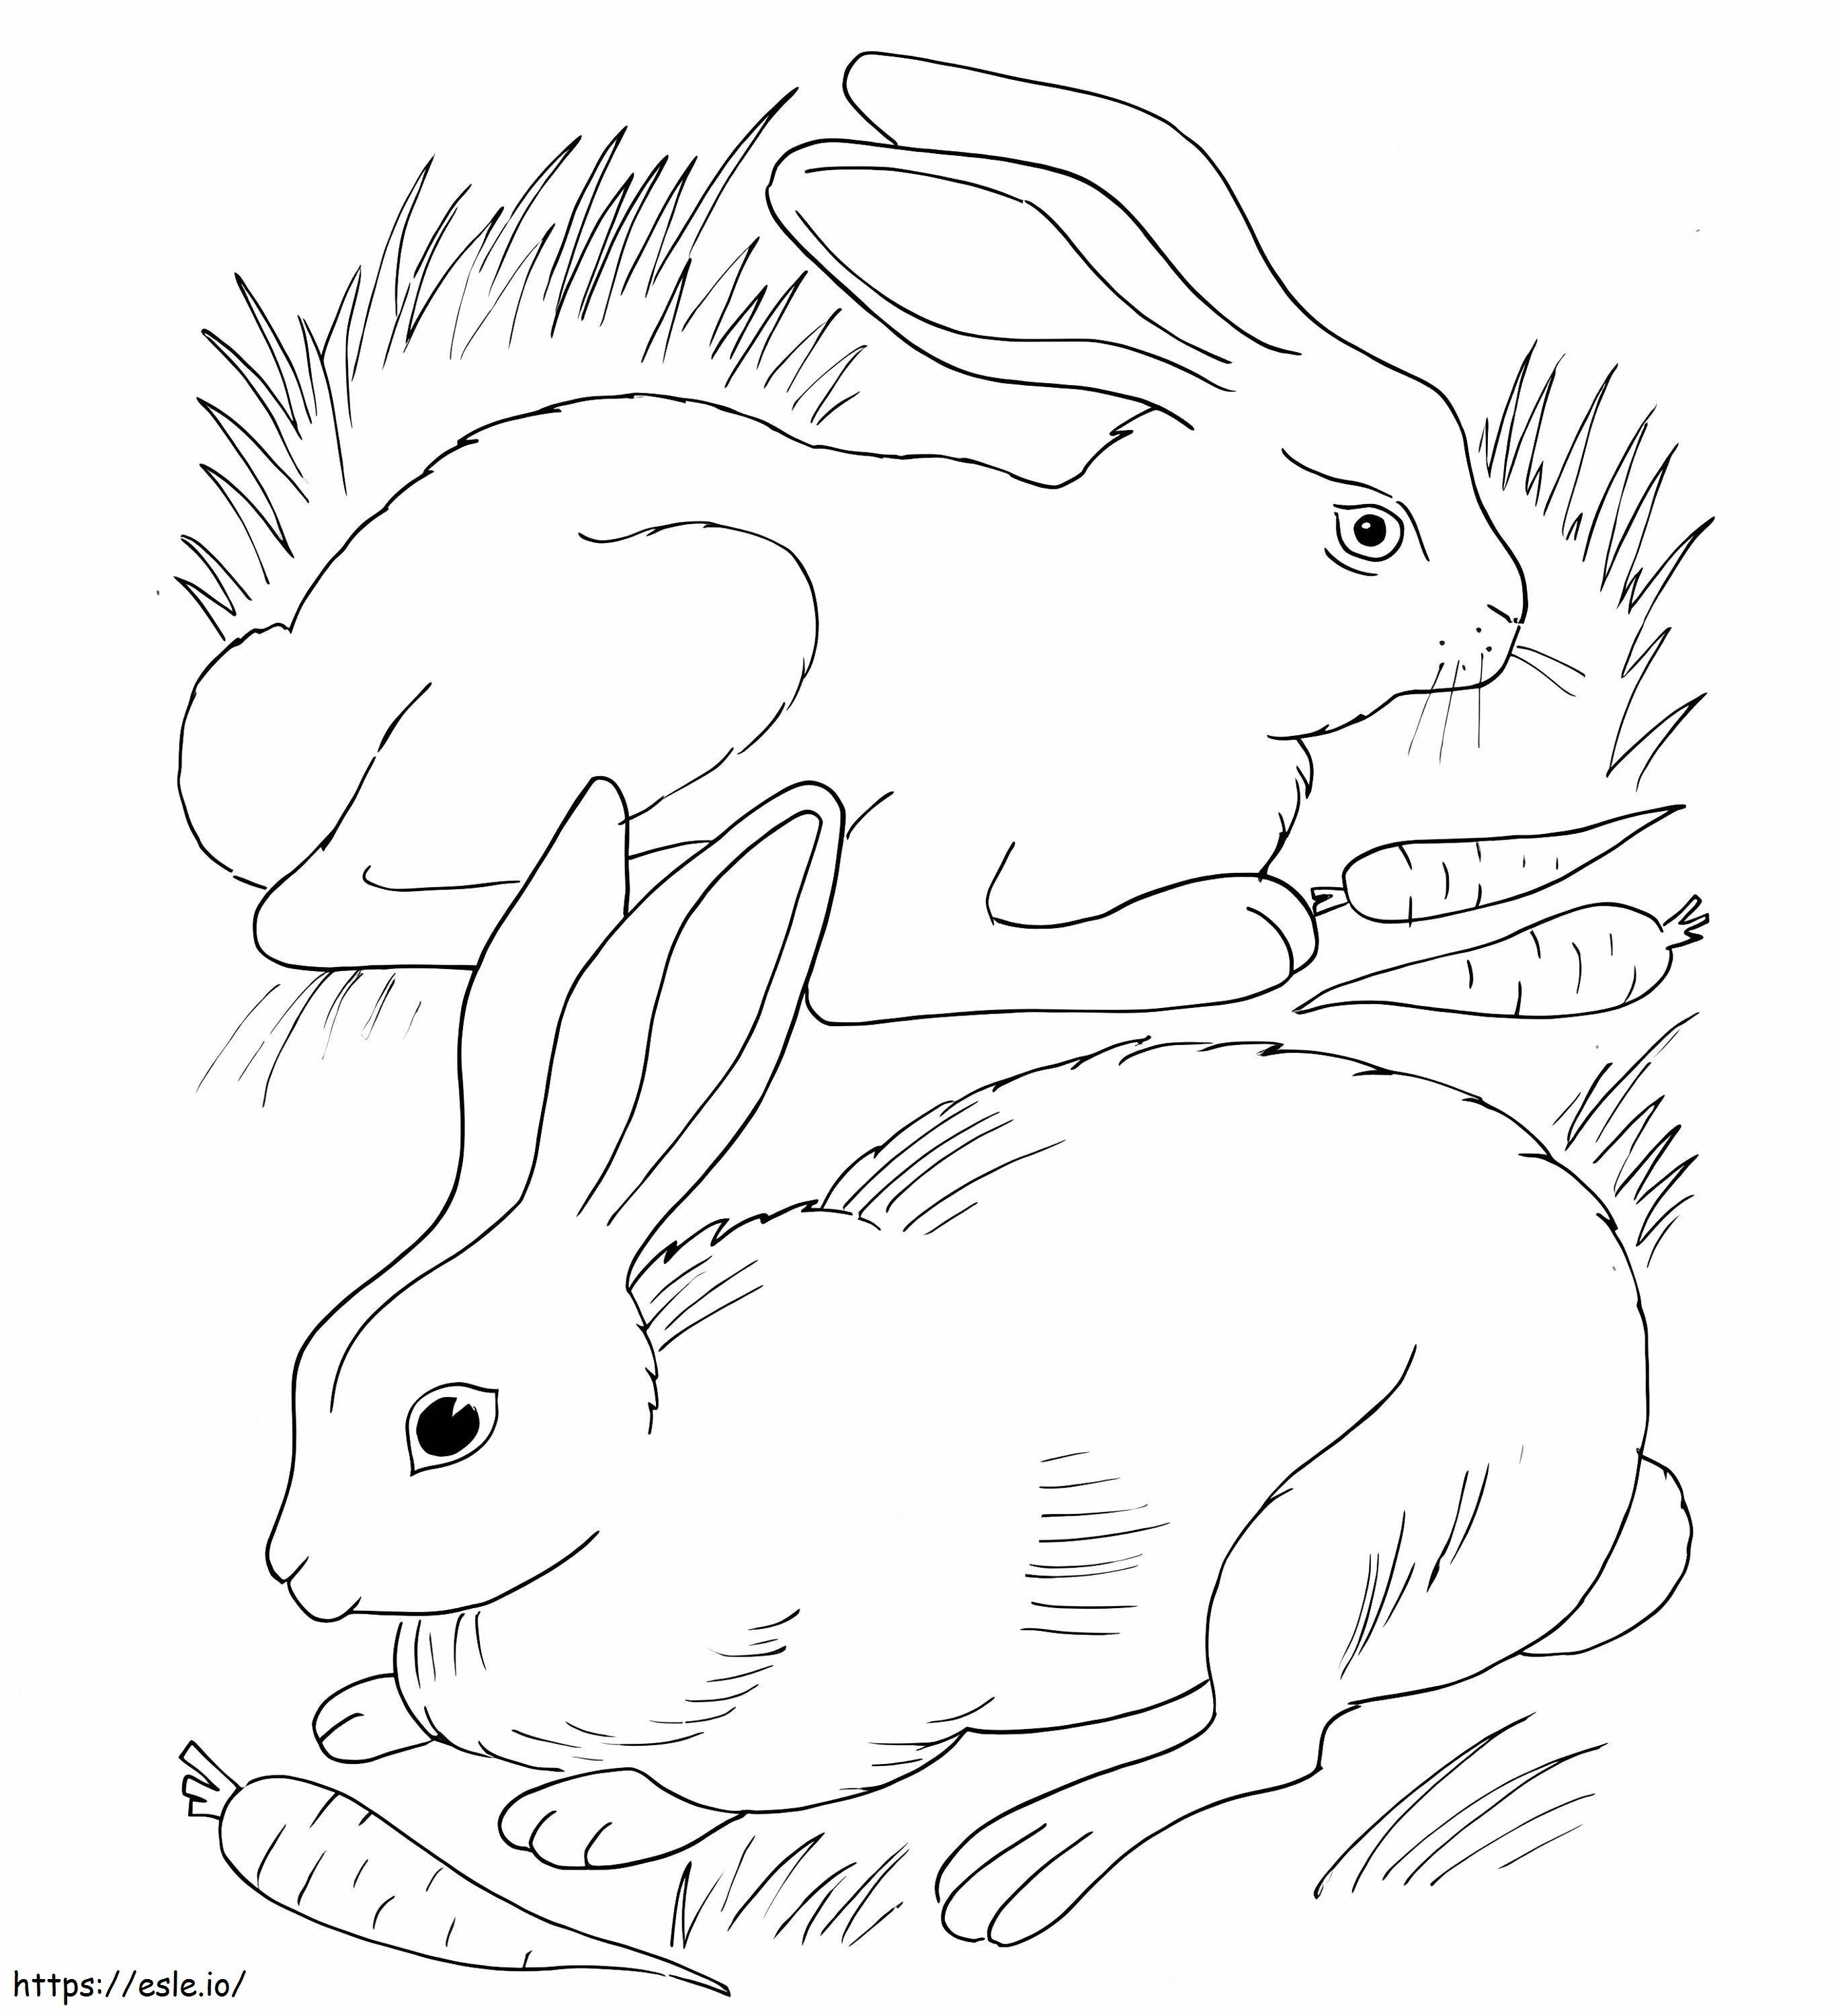 Two Rabbits coloring page